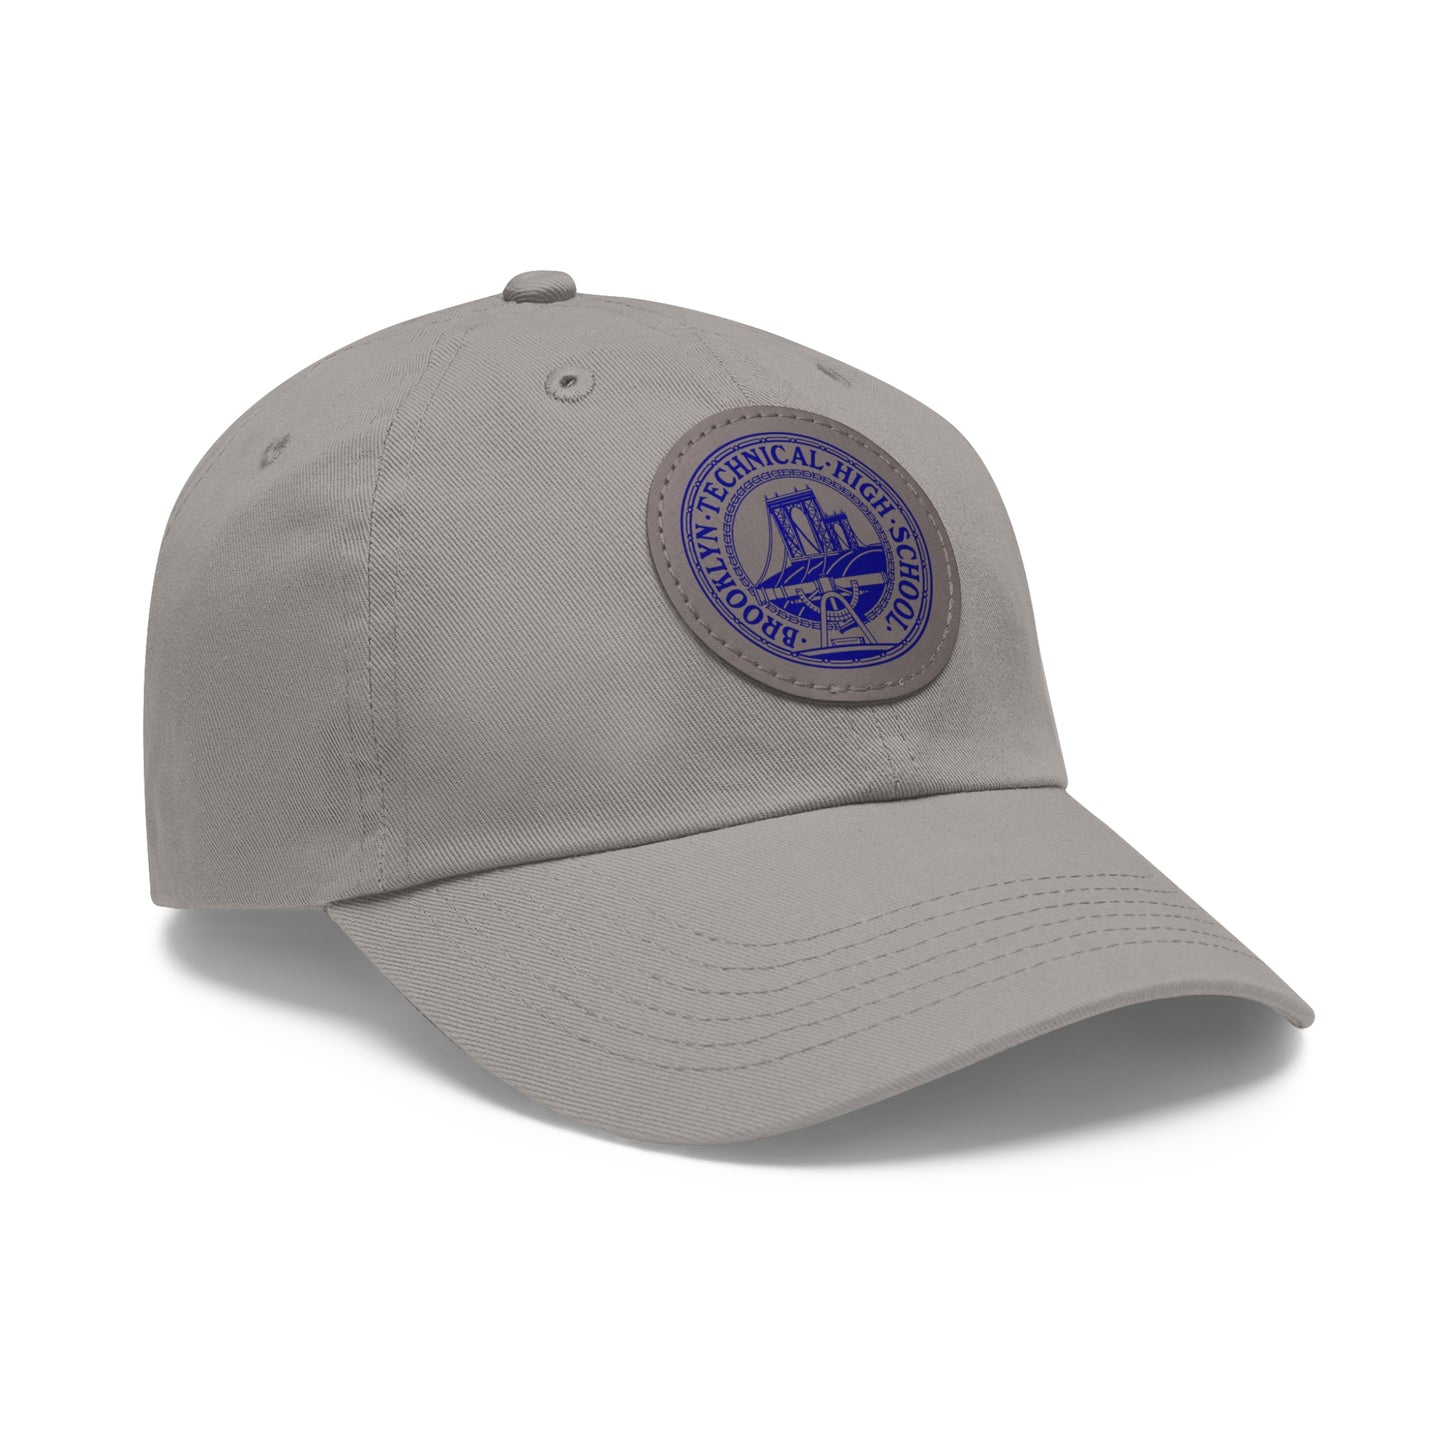 Classic Tech Seal - Hat With Circular Leather Patch